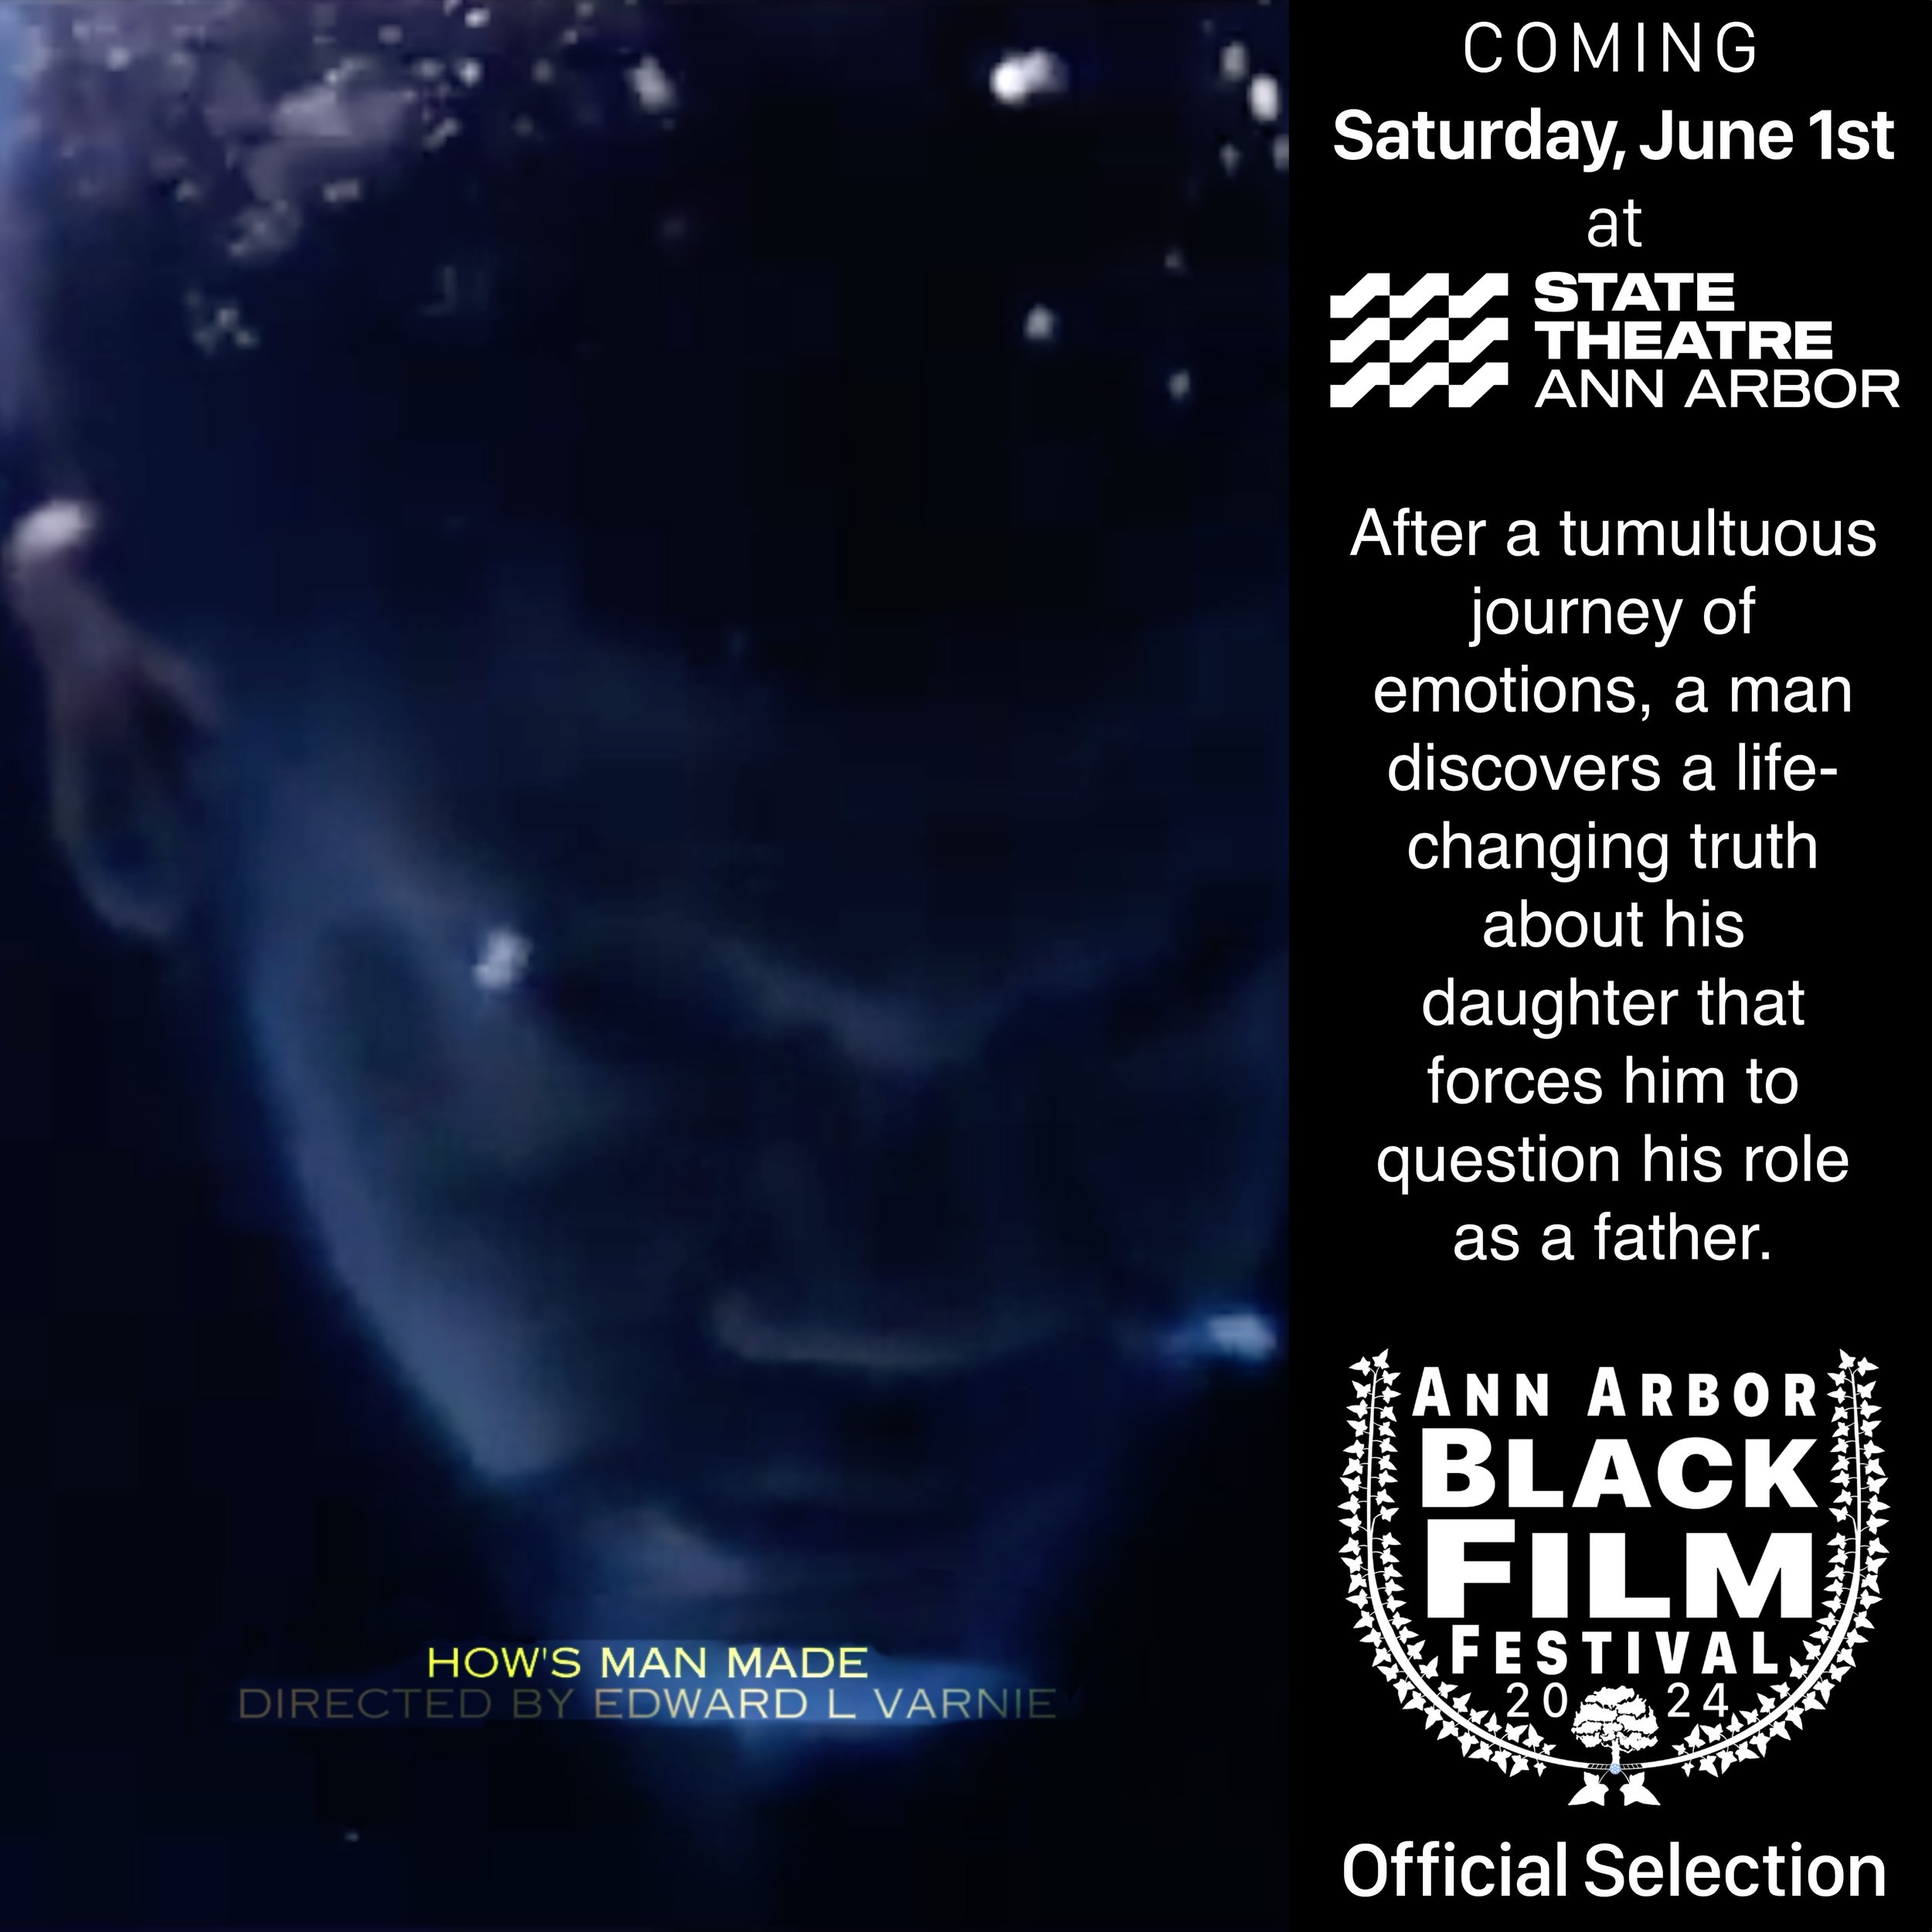 🎬 Get ready for a new cinematic experience! 🍿 Mark your calendars for Saturday, June 1st, when the electrifying A2 African American Festival comes to downtown Ann Arbor and the Ann Arbor Black Film Festival hits the State Theater! 🎥✨
Don&rsquo;t m